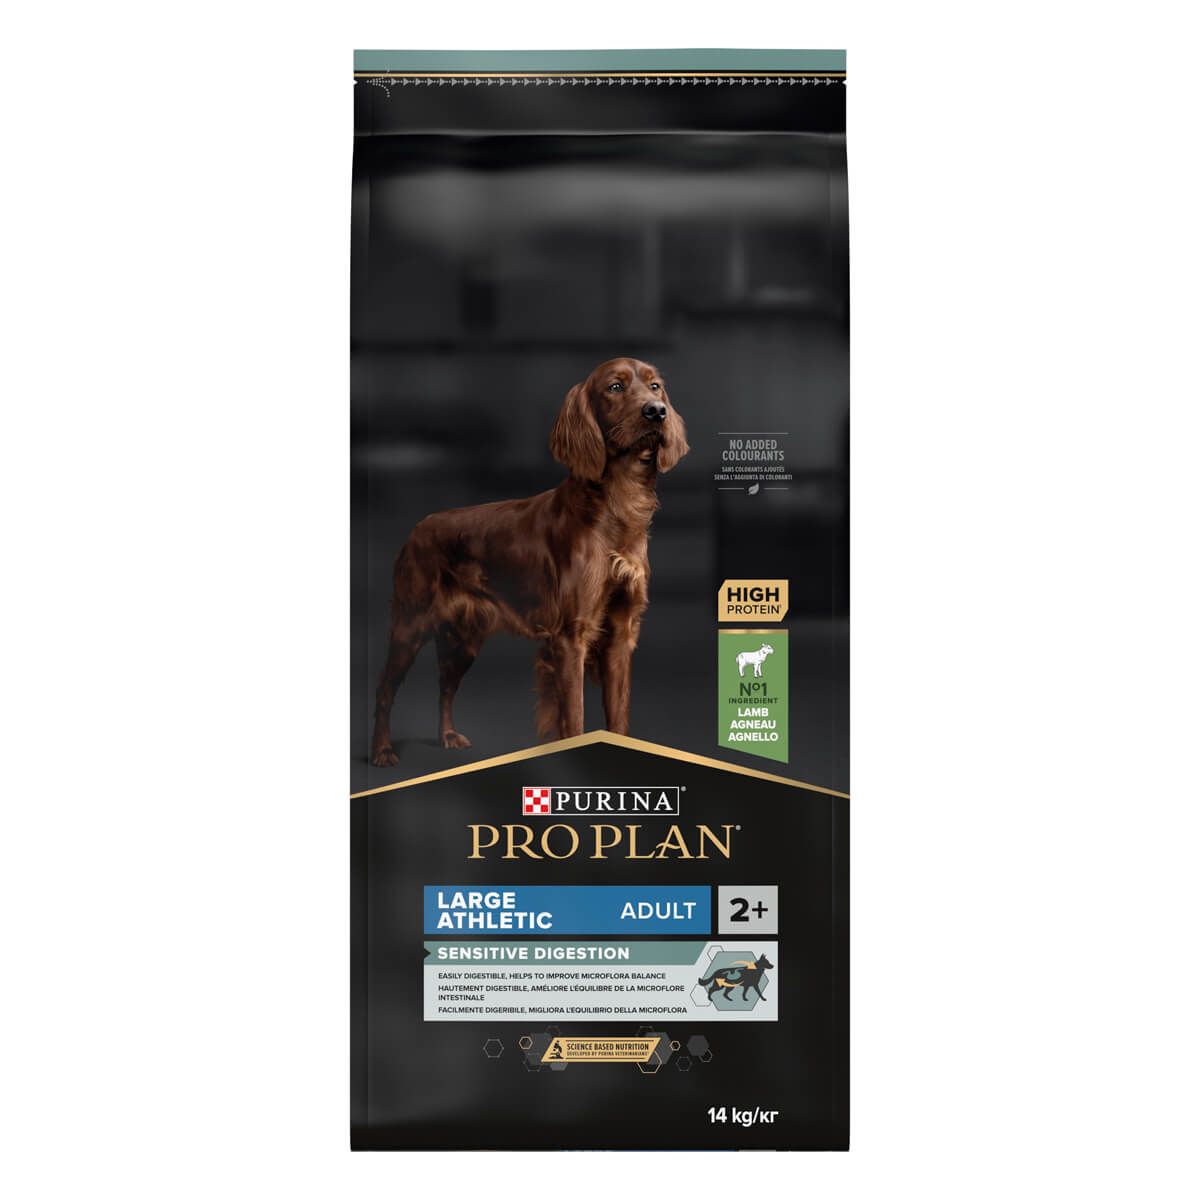 PURINA PRO PLAN LARGE ATHLETIC ADULT SENSITIVE DIGESTION RICCO IN AGNELLO